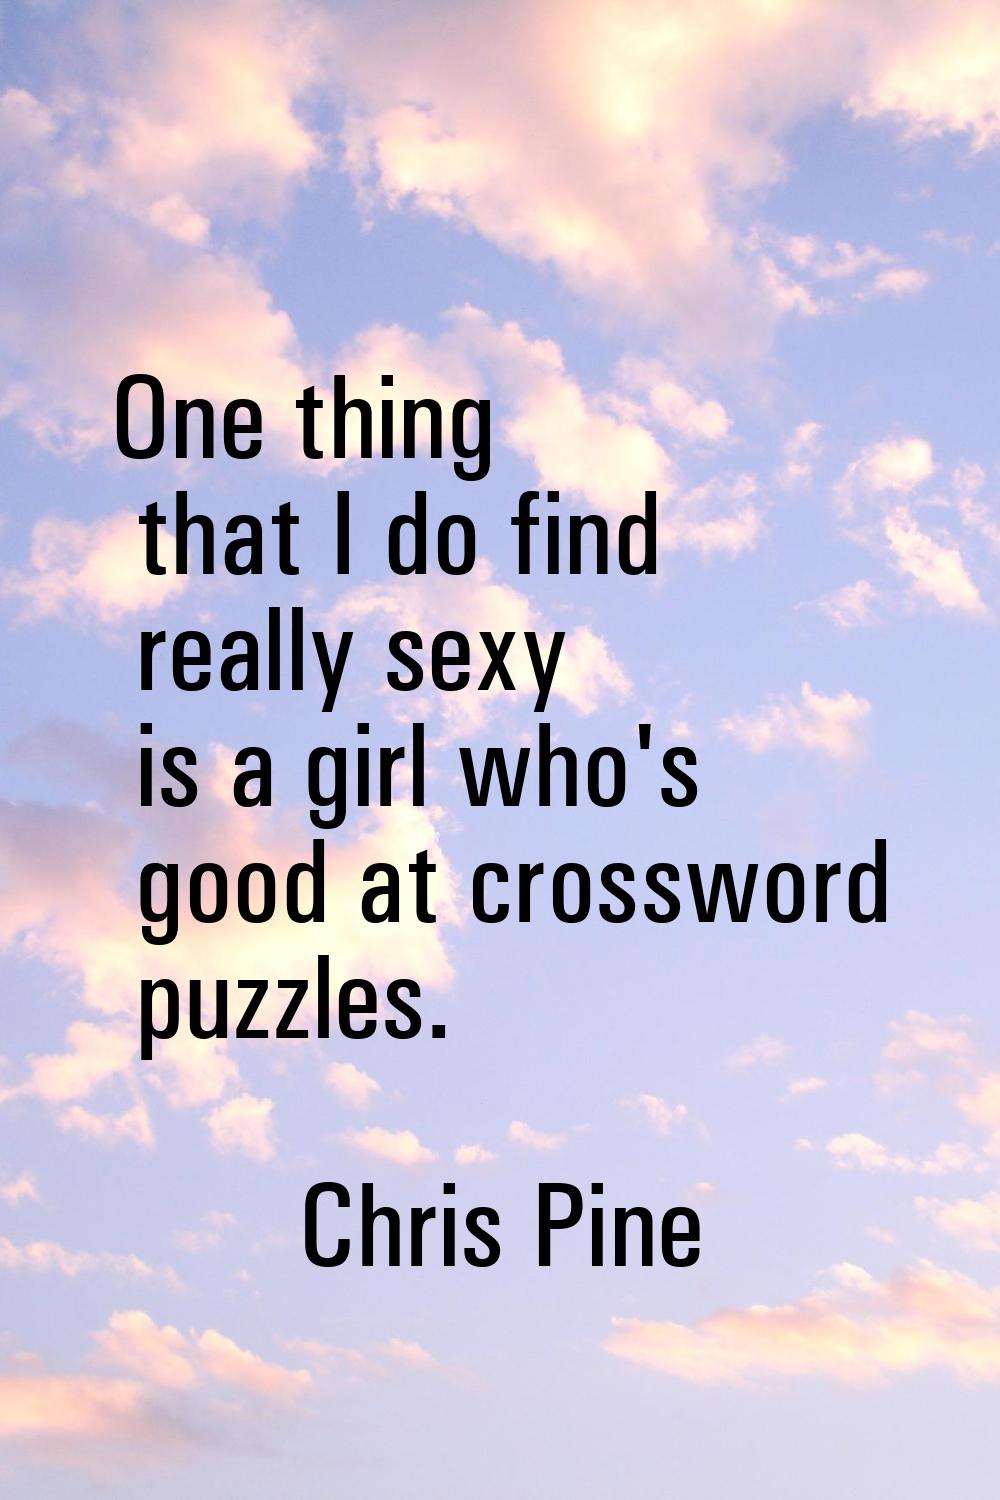 One thing that I do find really sexy is a girl who's good at crossword puzzles.